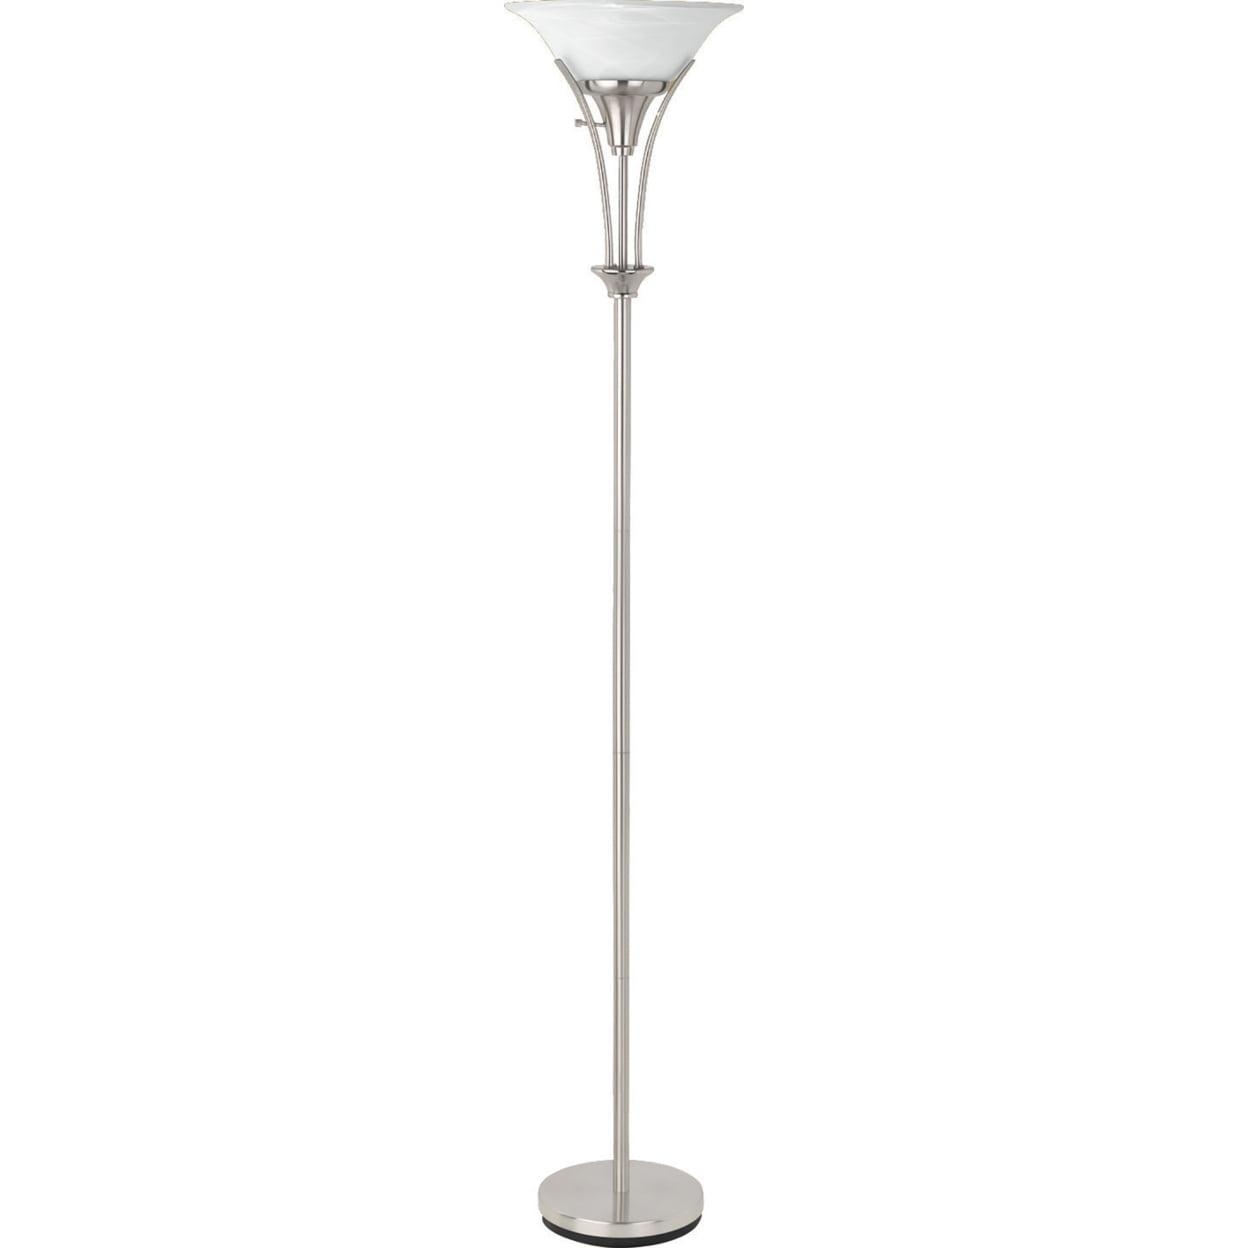 Transitional Silver Torchiere Floor Lamp with 3-Way Switch